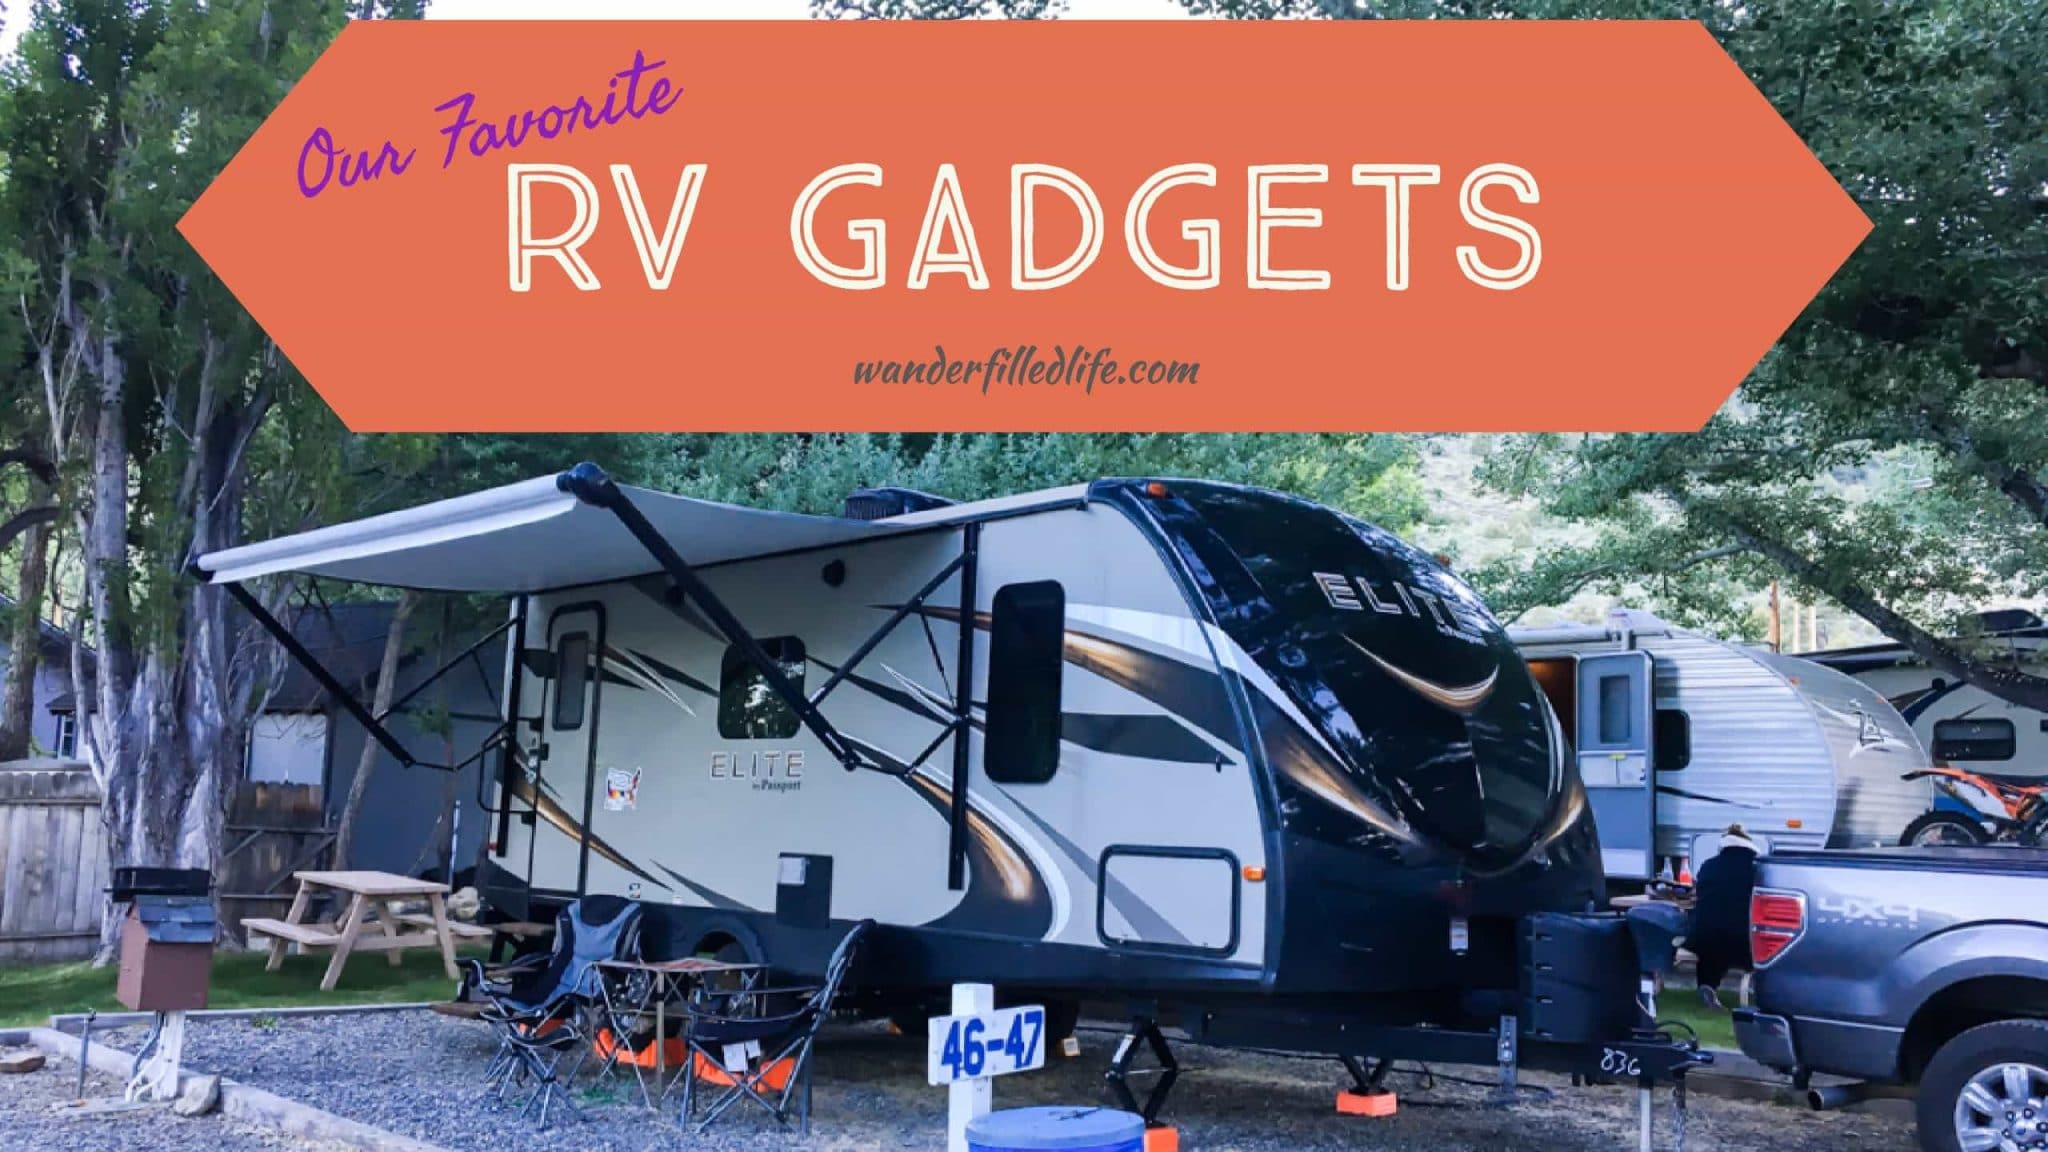 Our Favorite RV Gadgets